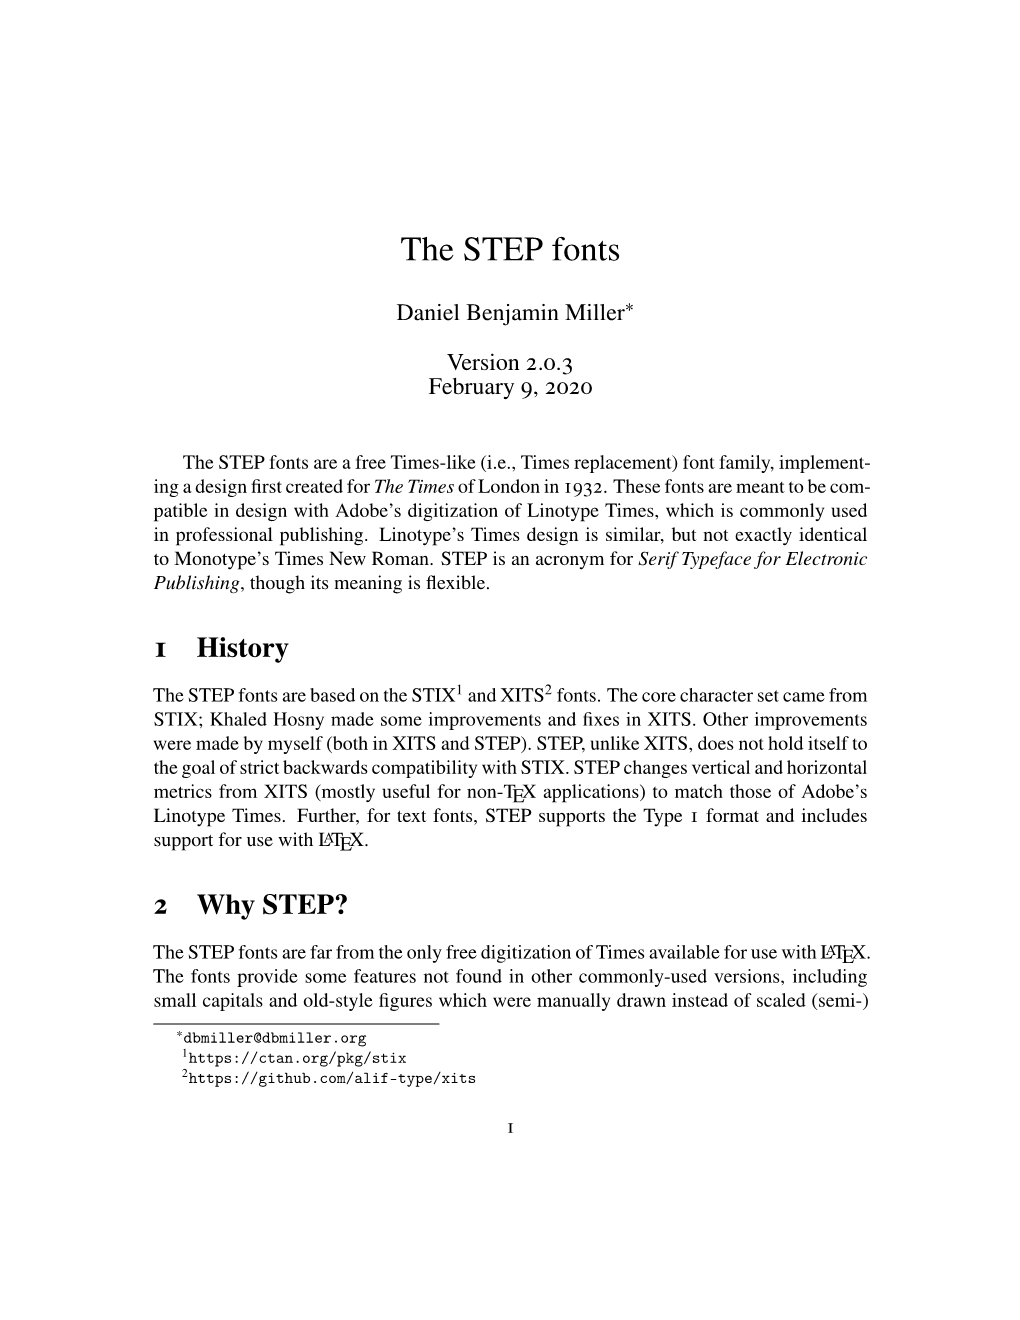 The STEP Fonts